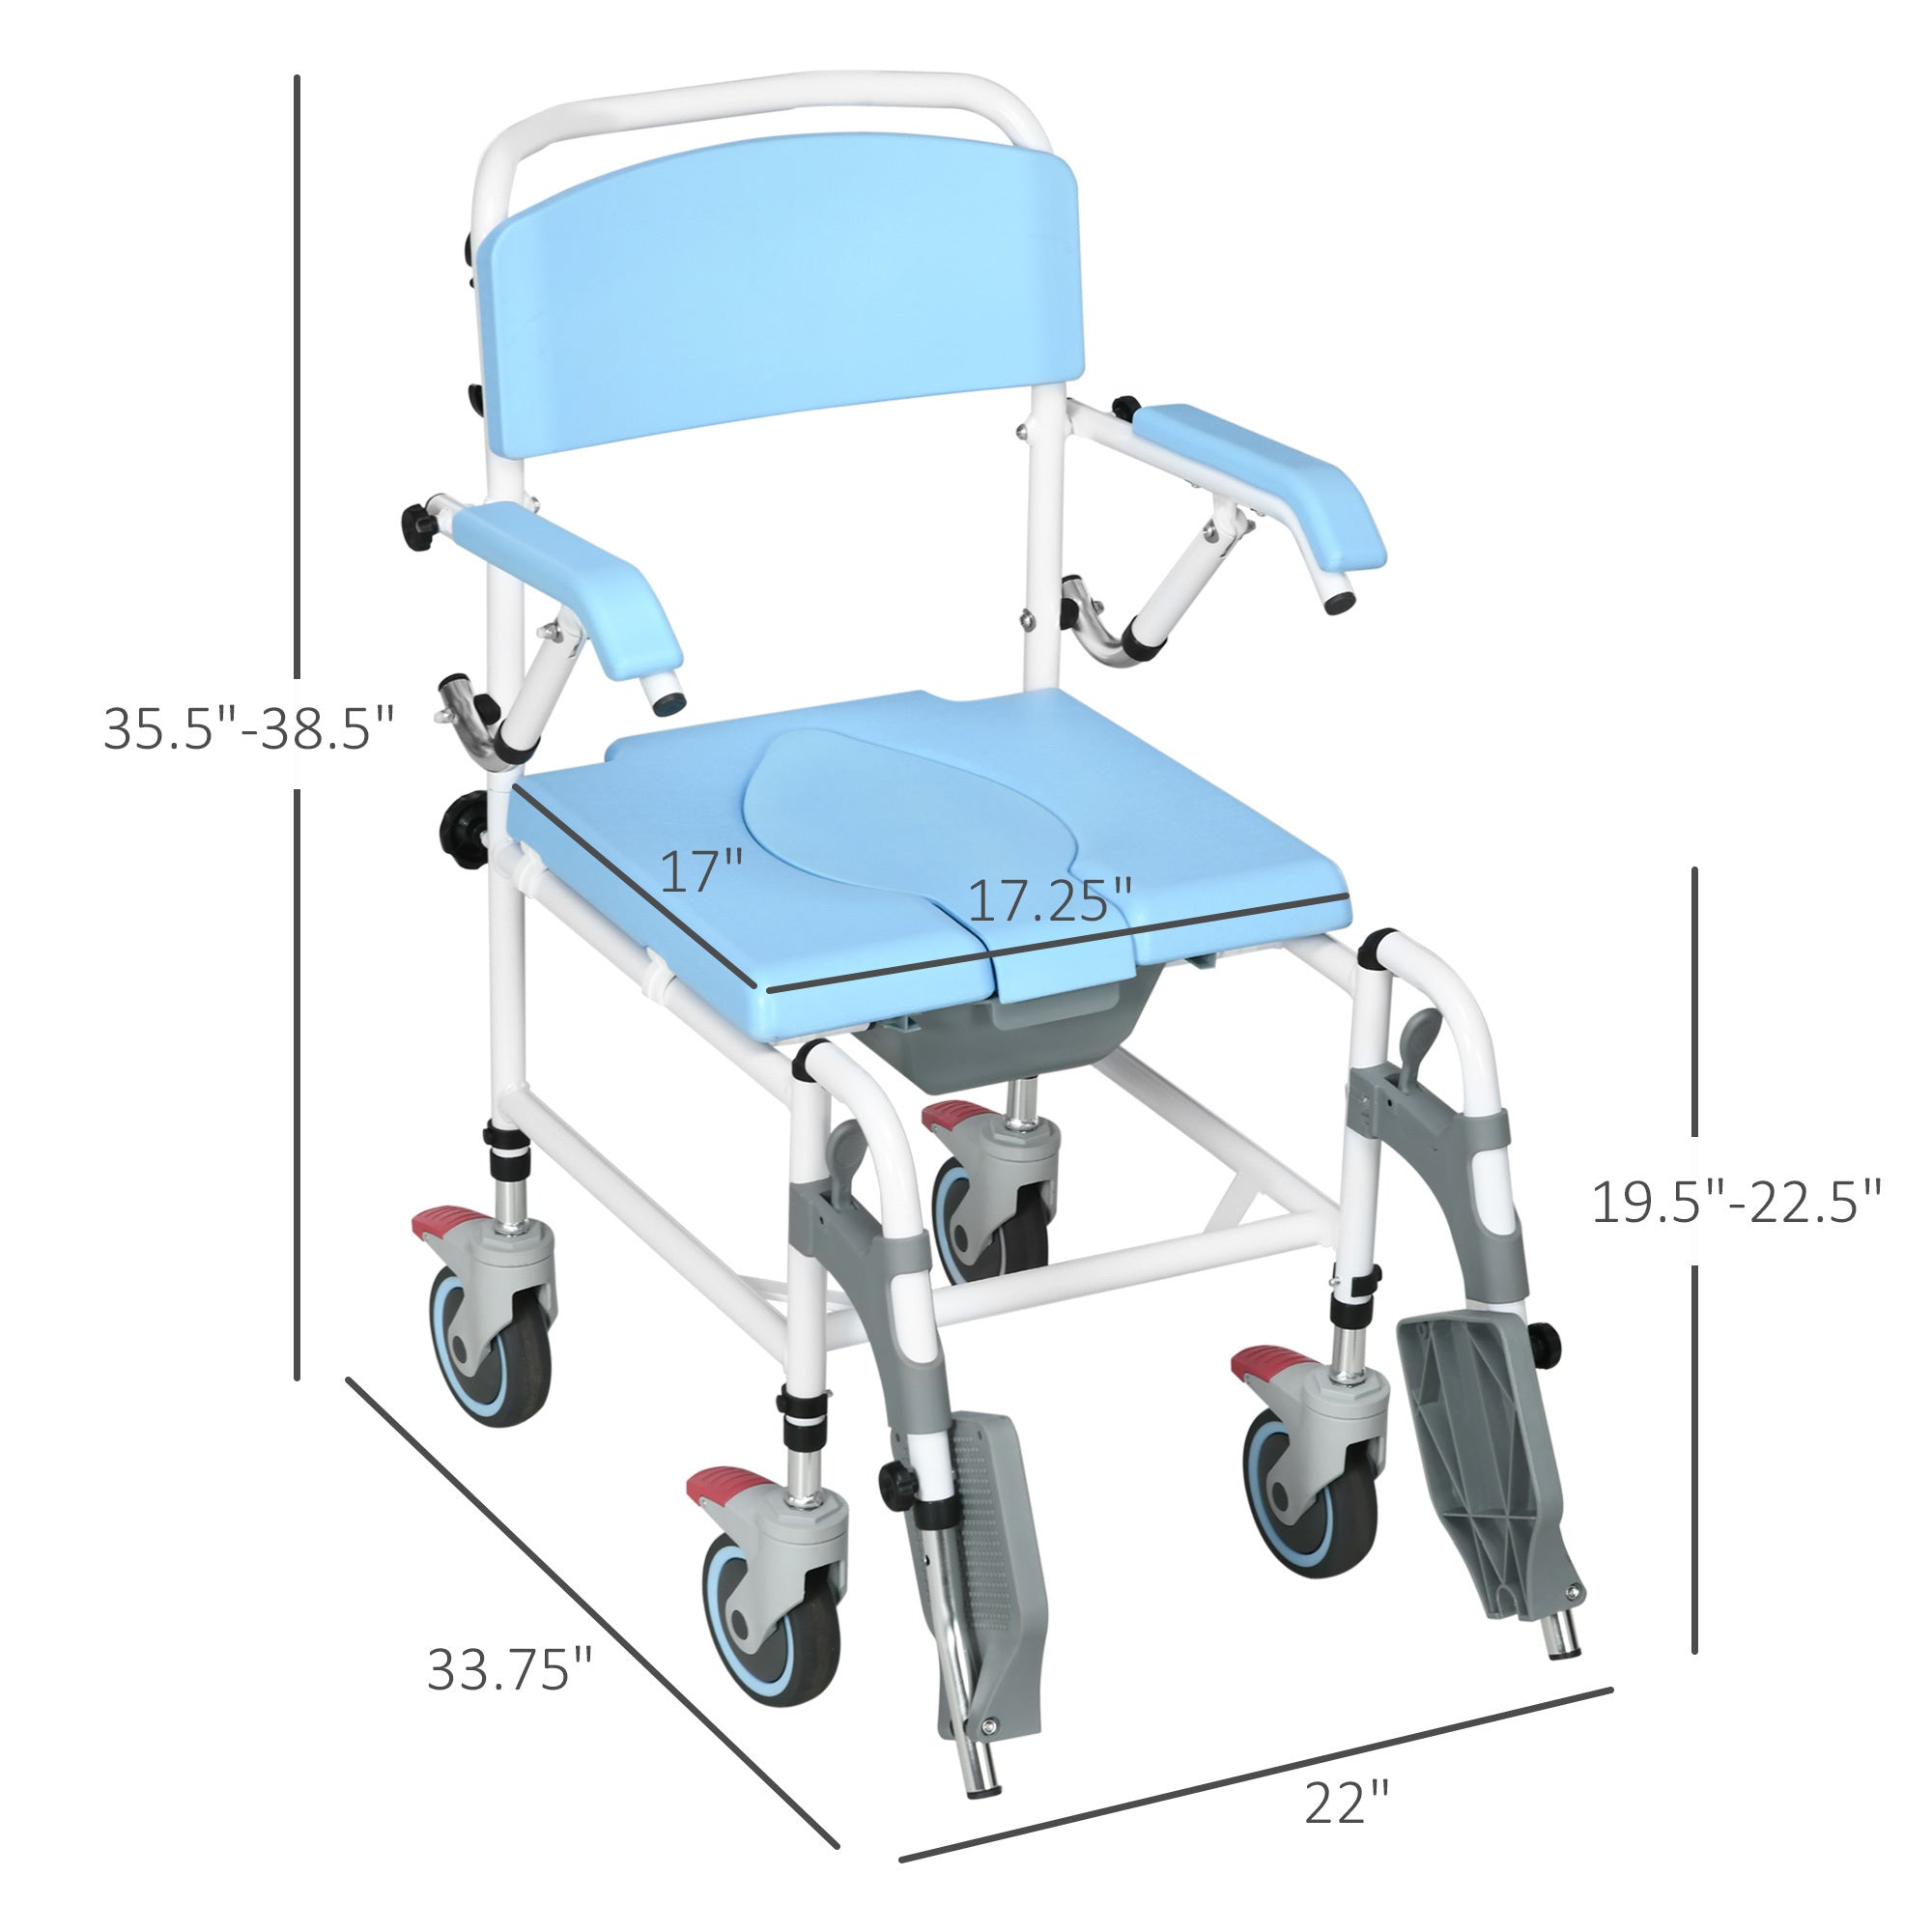 Accessibility Commode Wheelchair, Rolling Shower blue-pu leather